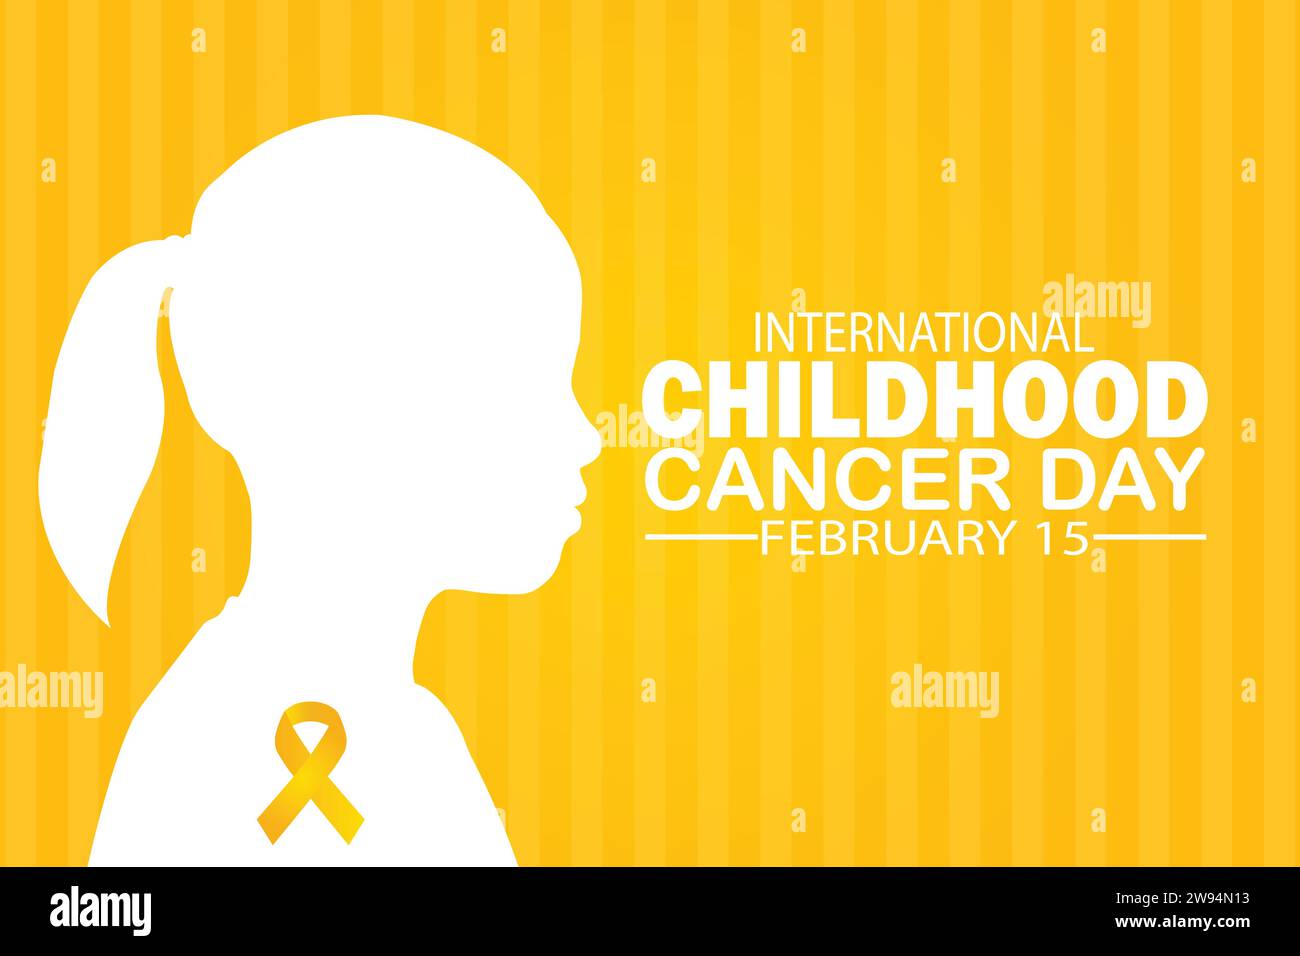 International Childhood Cancer Day Vector illustration. February 15. Suitable for greeting card, poster and banner. Stock Vector